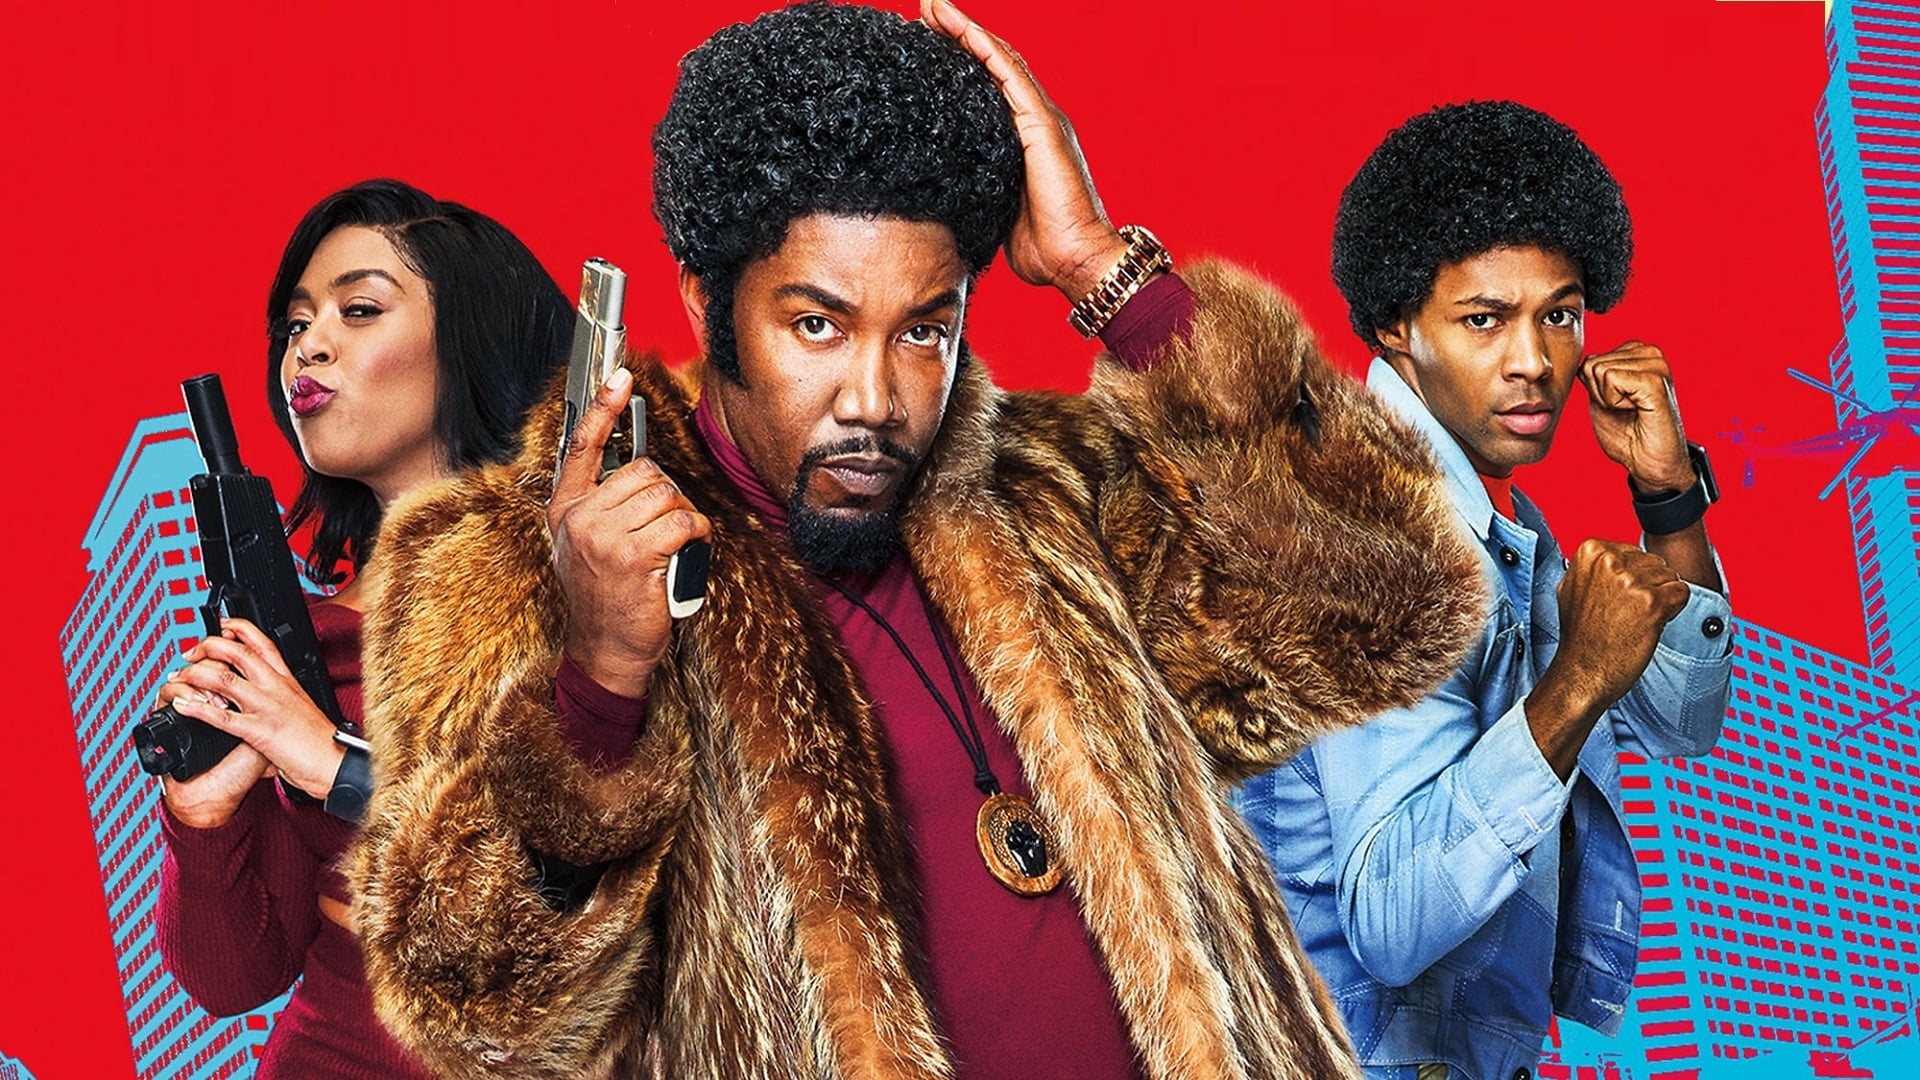 Index of /Movie/Undercover Brother 2 (2019) .